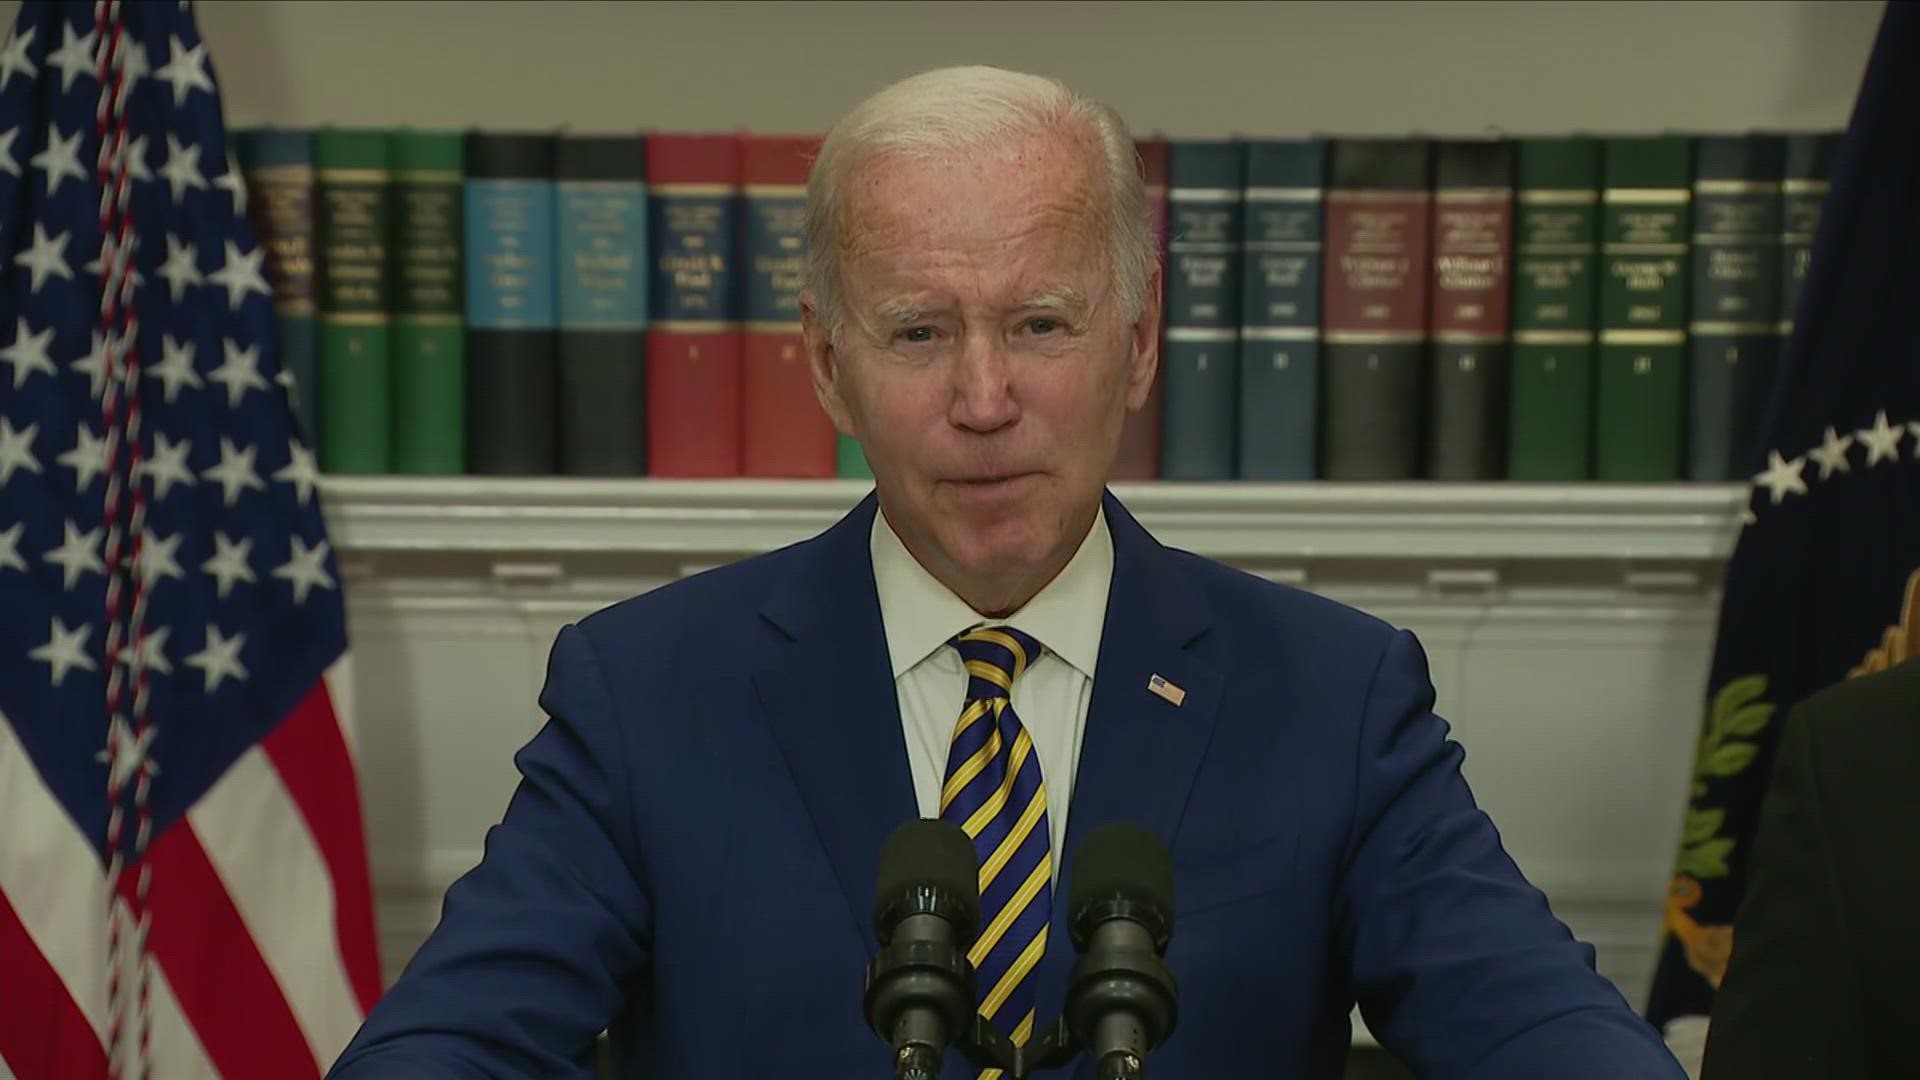 Biden announced Wednesday his long-awaited plan to deliver on a campaign promise to provide $10,000 in student debt cancellation for millions of Americans.